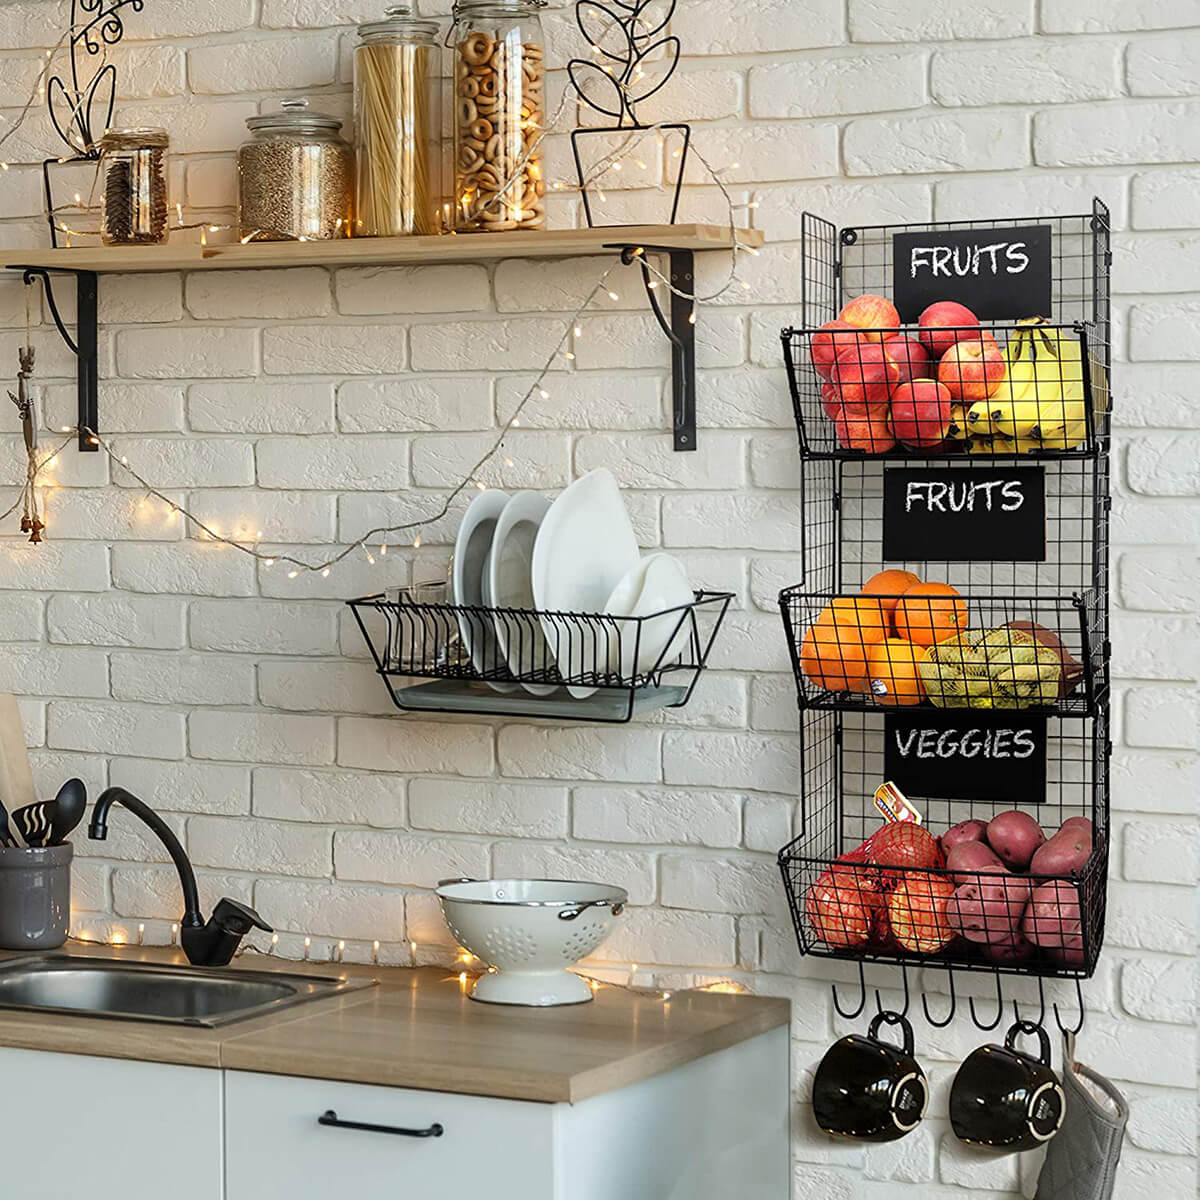  ideas for storage in small kitchen